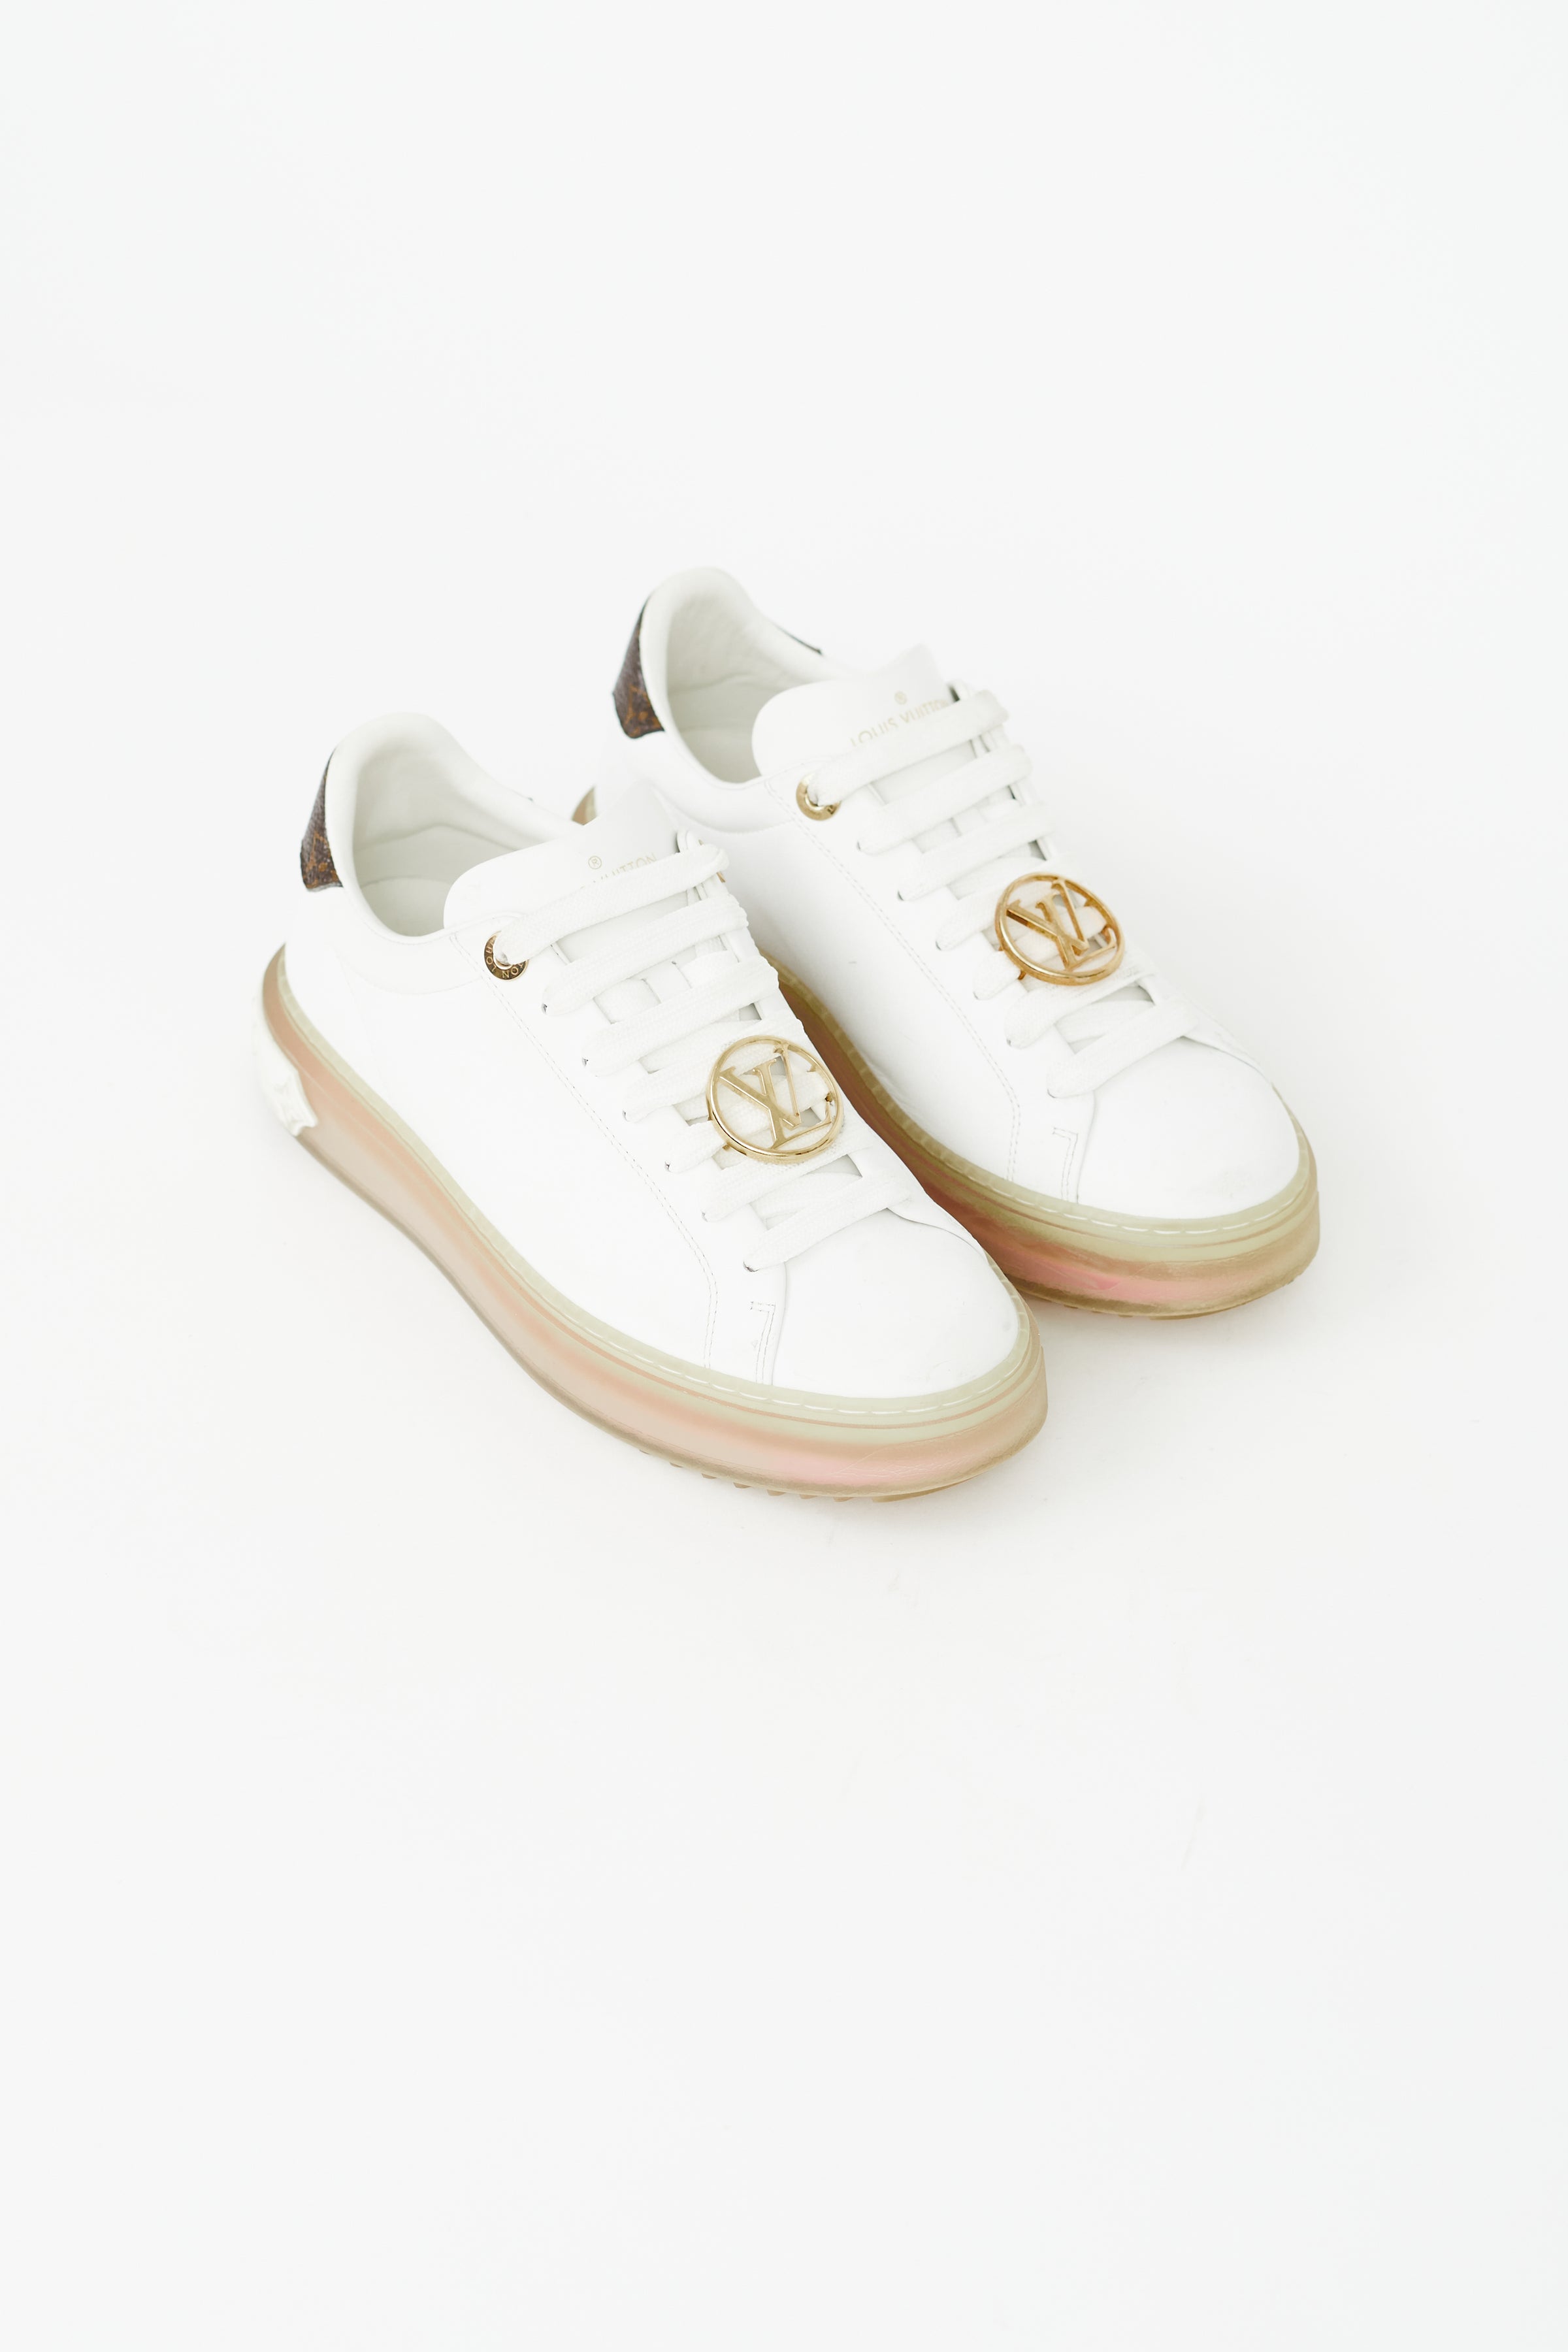 Louis Vuitton Logo Embroidered Time Out Sneakers 1A3U46 White/Pink